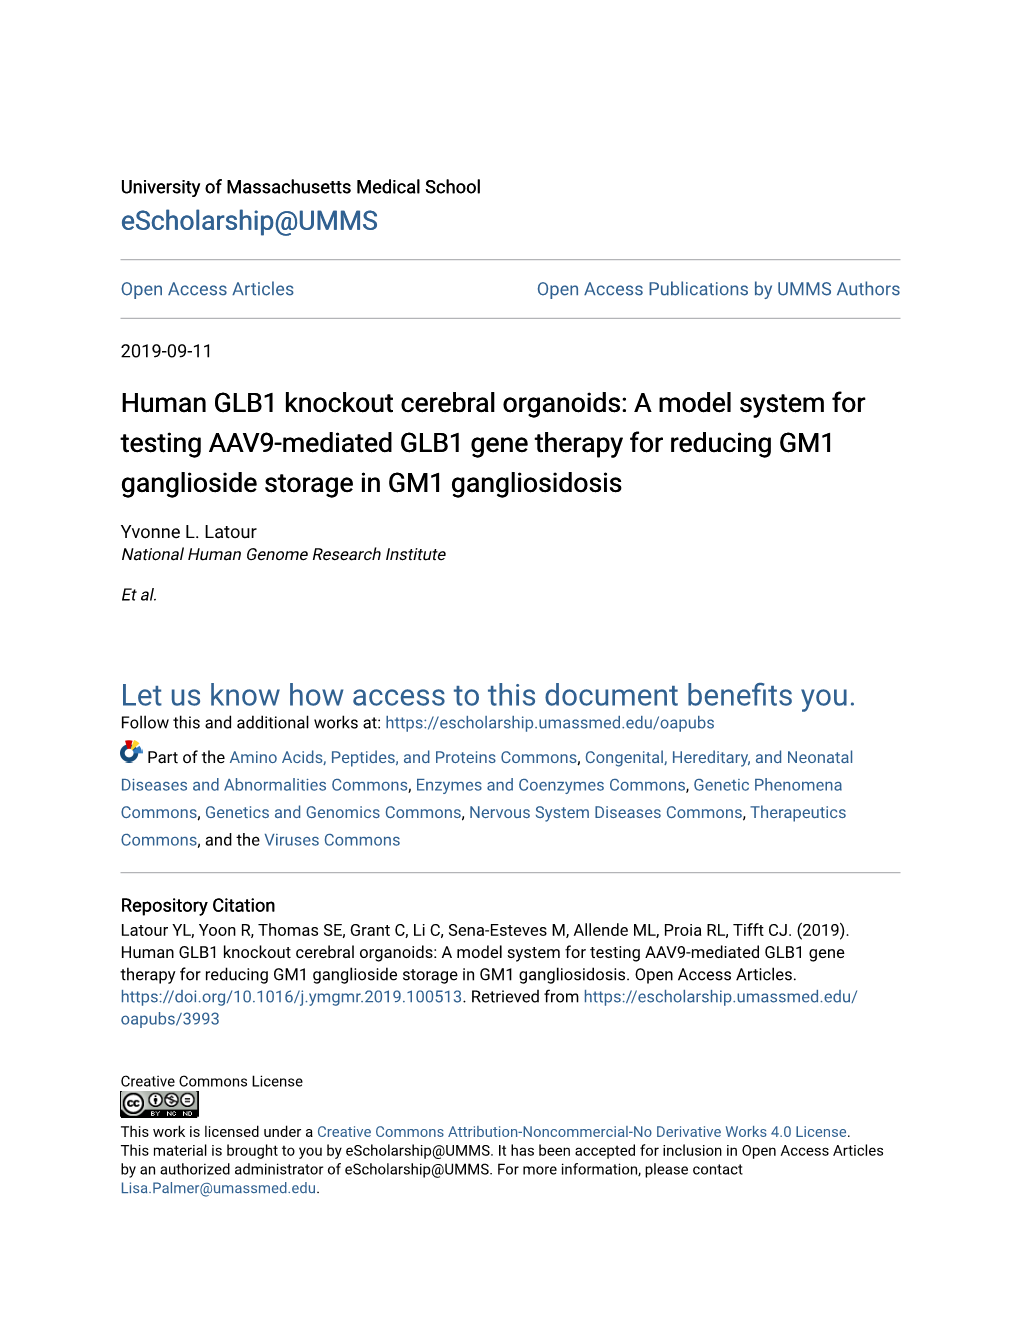 Human GLB1 Knockout Cerebral Organoids: a Model System for Testing AAV9-Mediated GLB1 Gene Therapy for Reducing GM1 Ganglioside Storage in GM1 Gangliosidosis